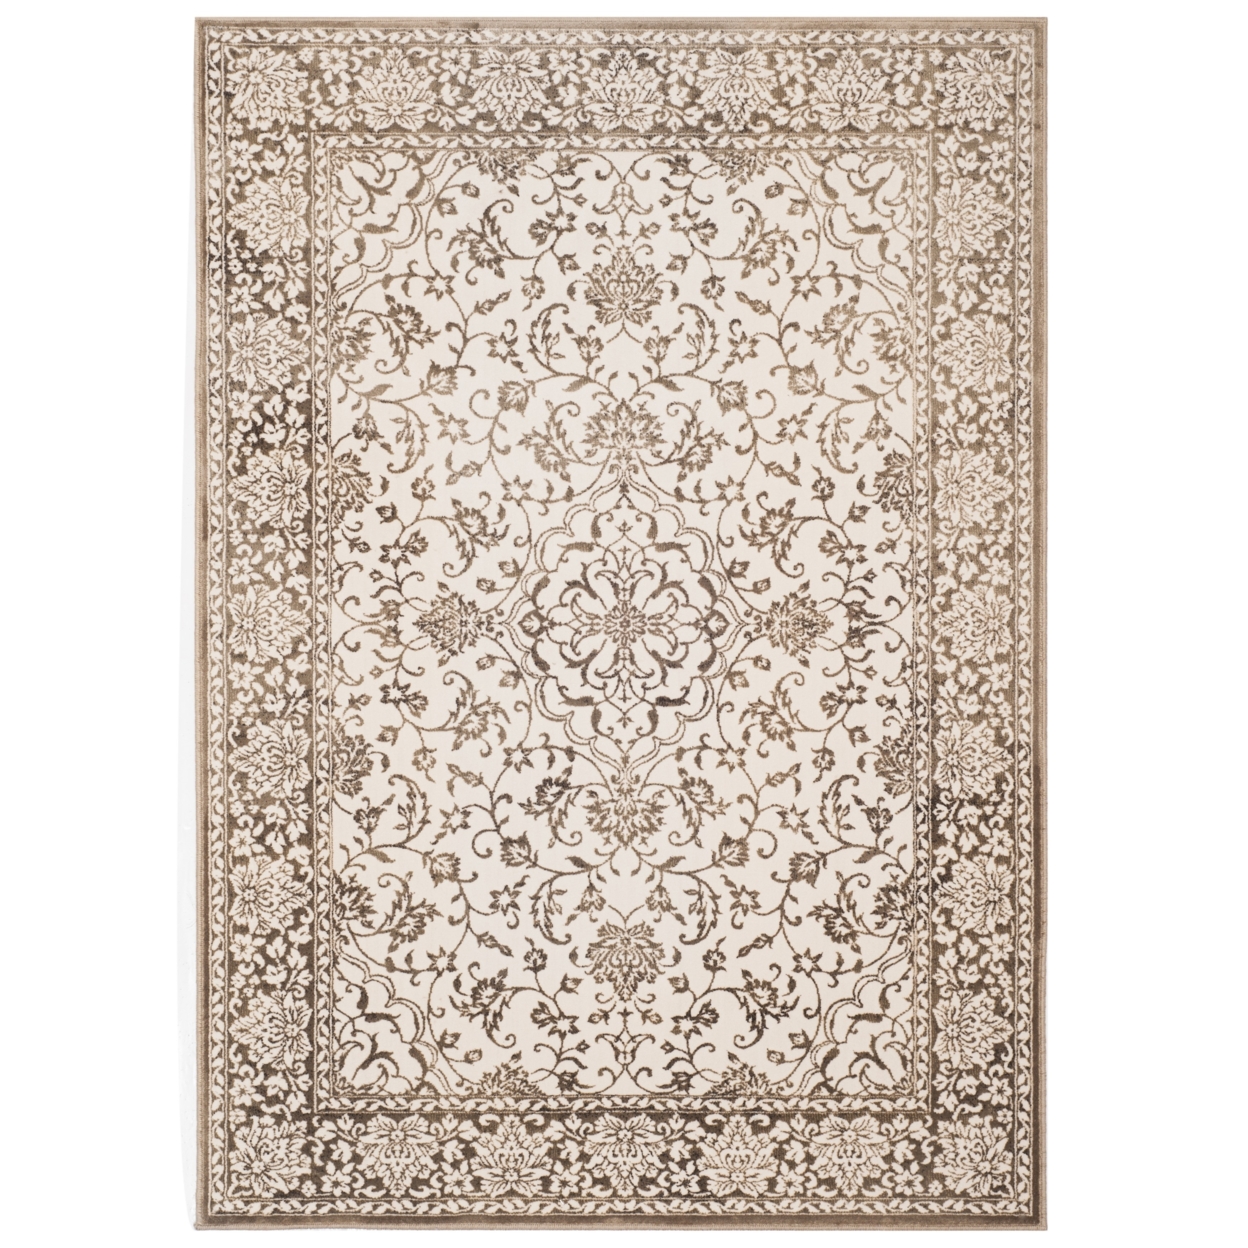 SAFAVIEH Noble Collection NBL659-5280 Brown / Creme Rug - 4' X 5' 7